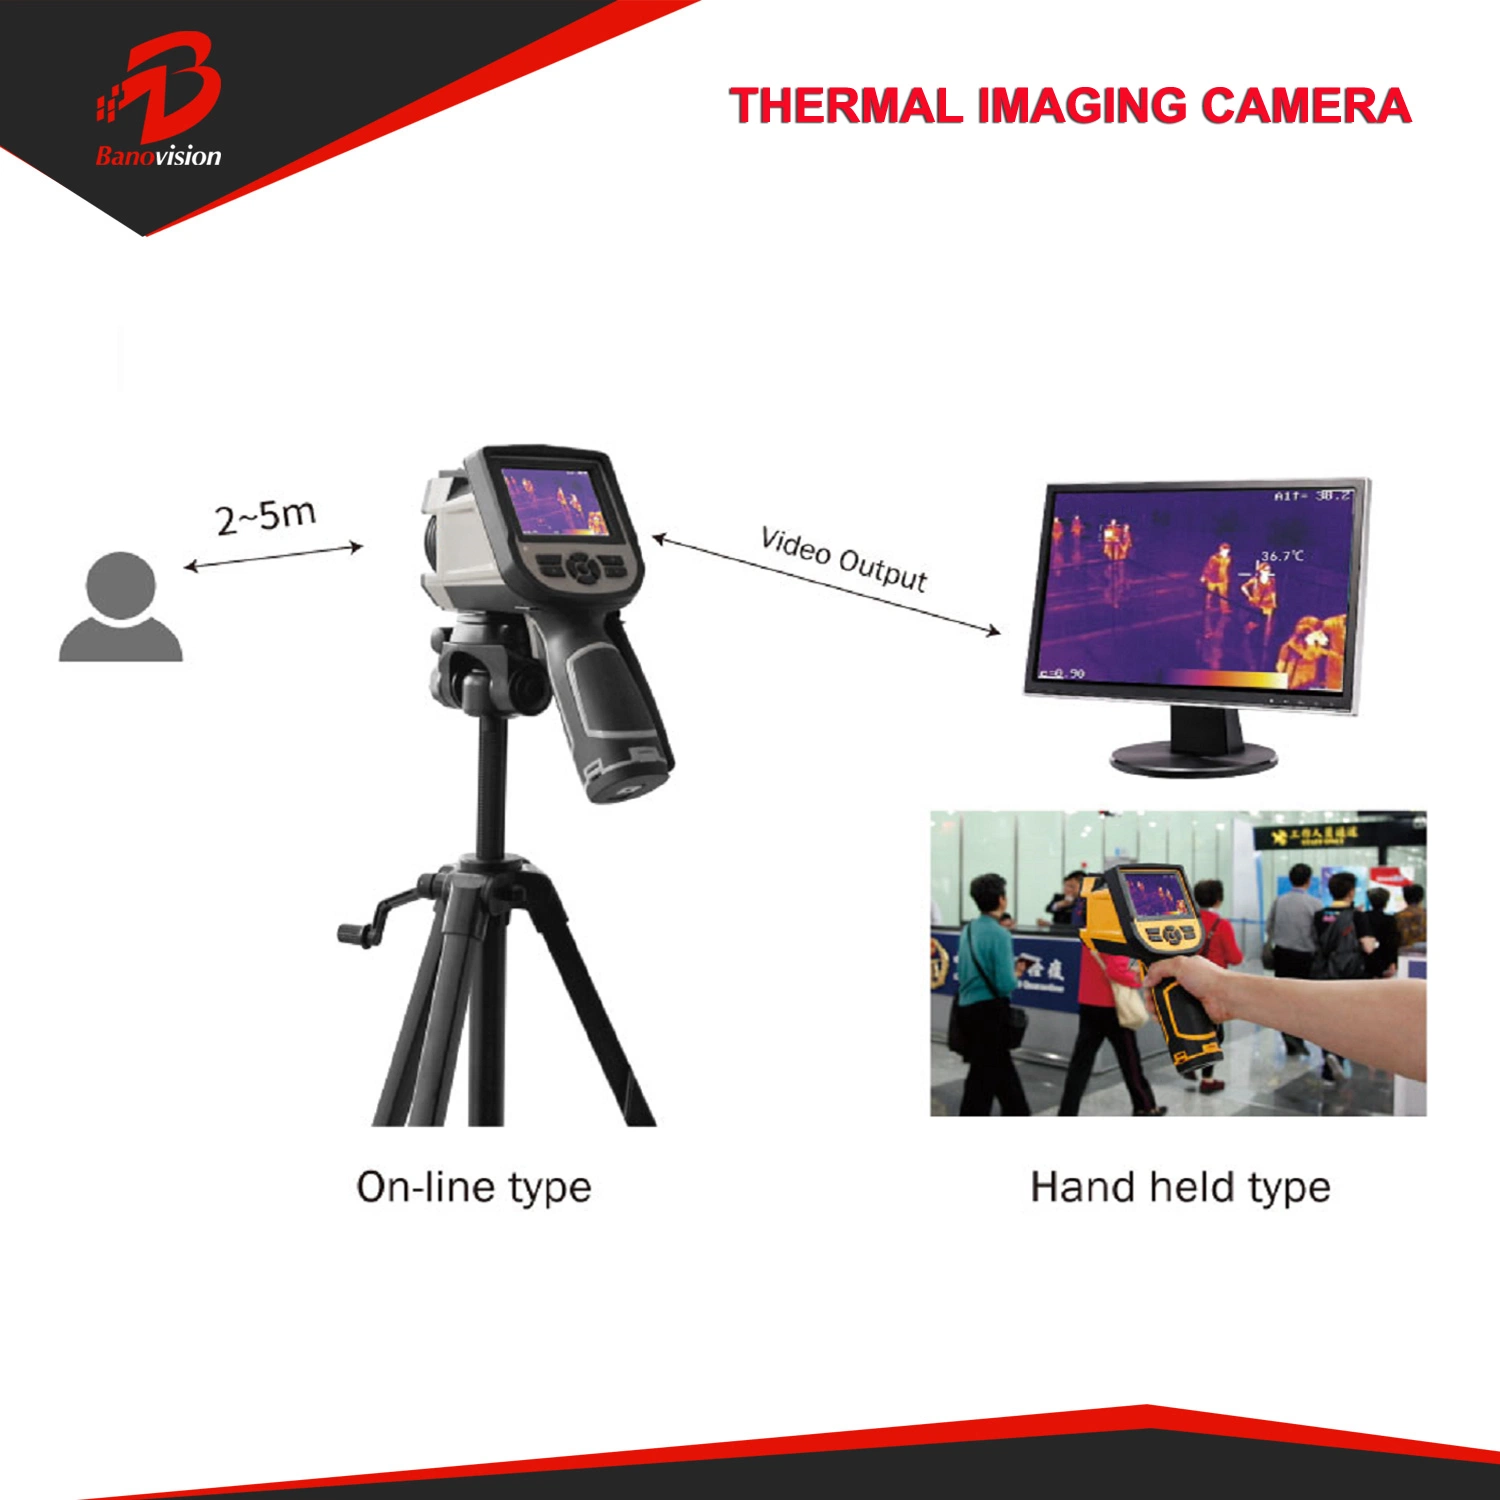 Digital Thermal Fever Detection Camera with High Accuracy